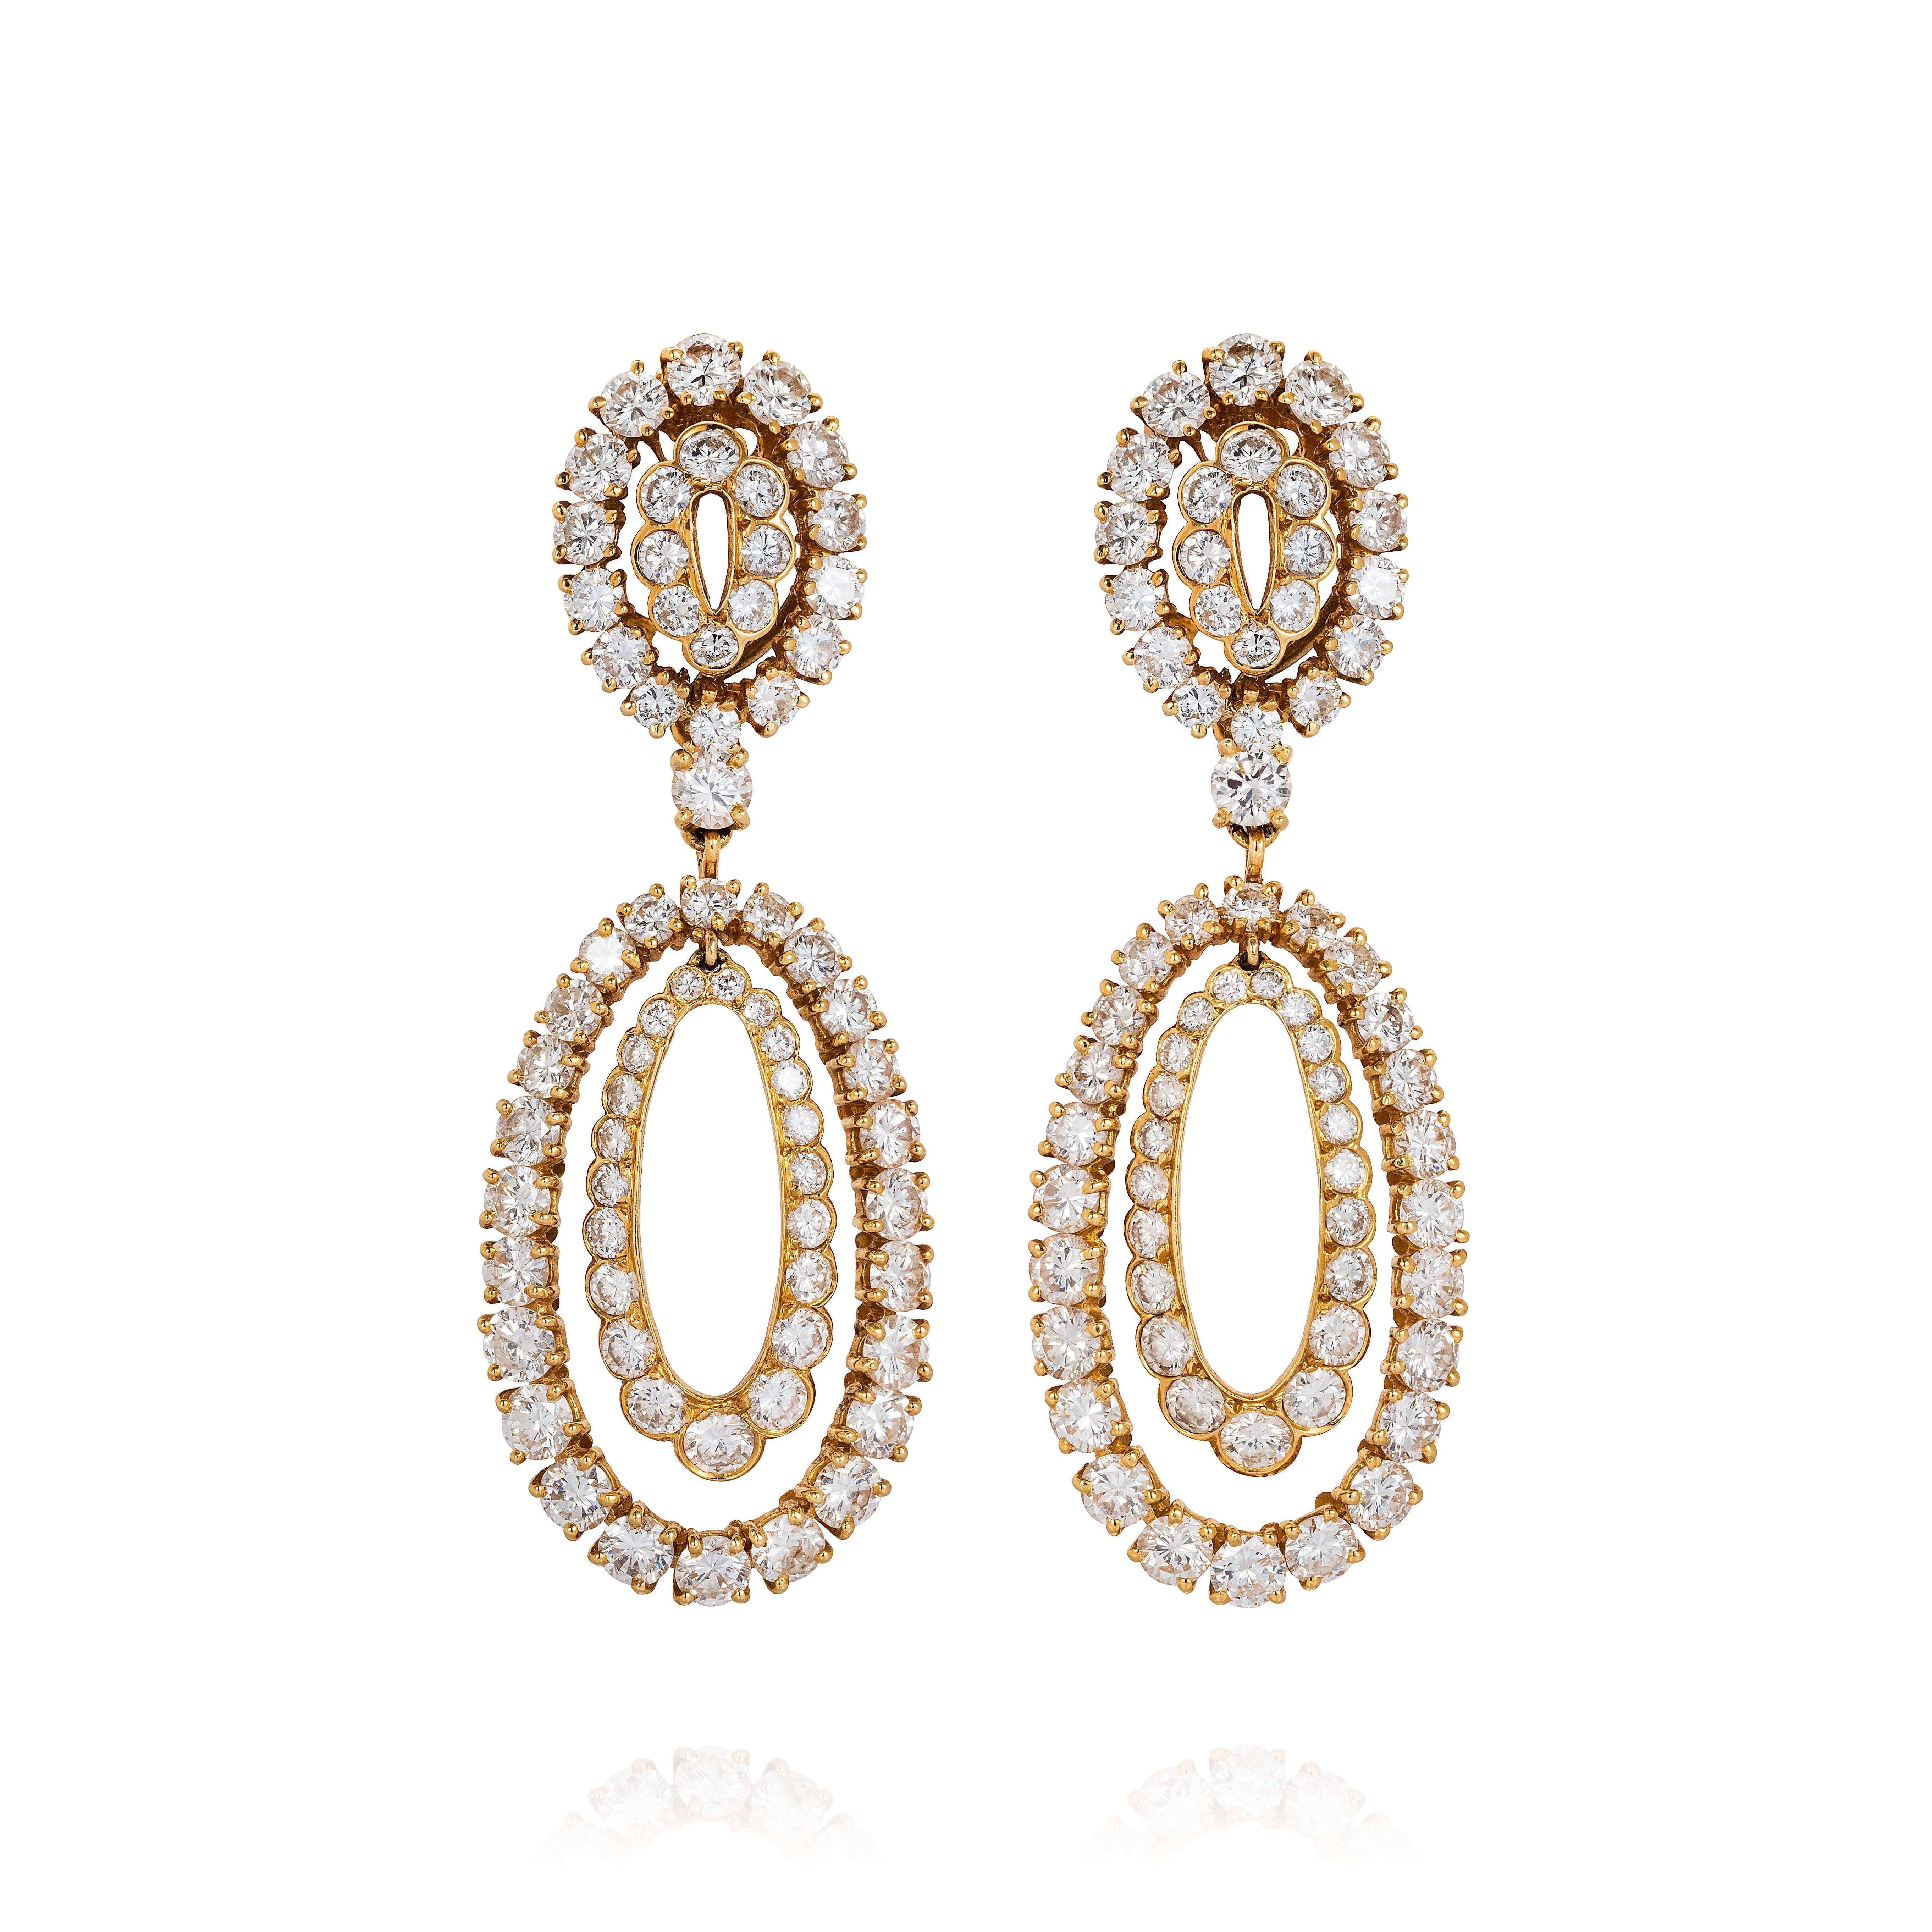 A gold and diamond parure by Van Cleef & Arpels comprised of a detachable brooch/pendant and chain arranged in oval festoons, and a pair of night and day earrings of the same design. In 18KT yellow gold, set with approximately 60cts of round